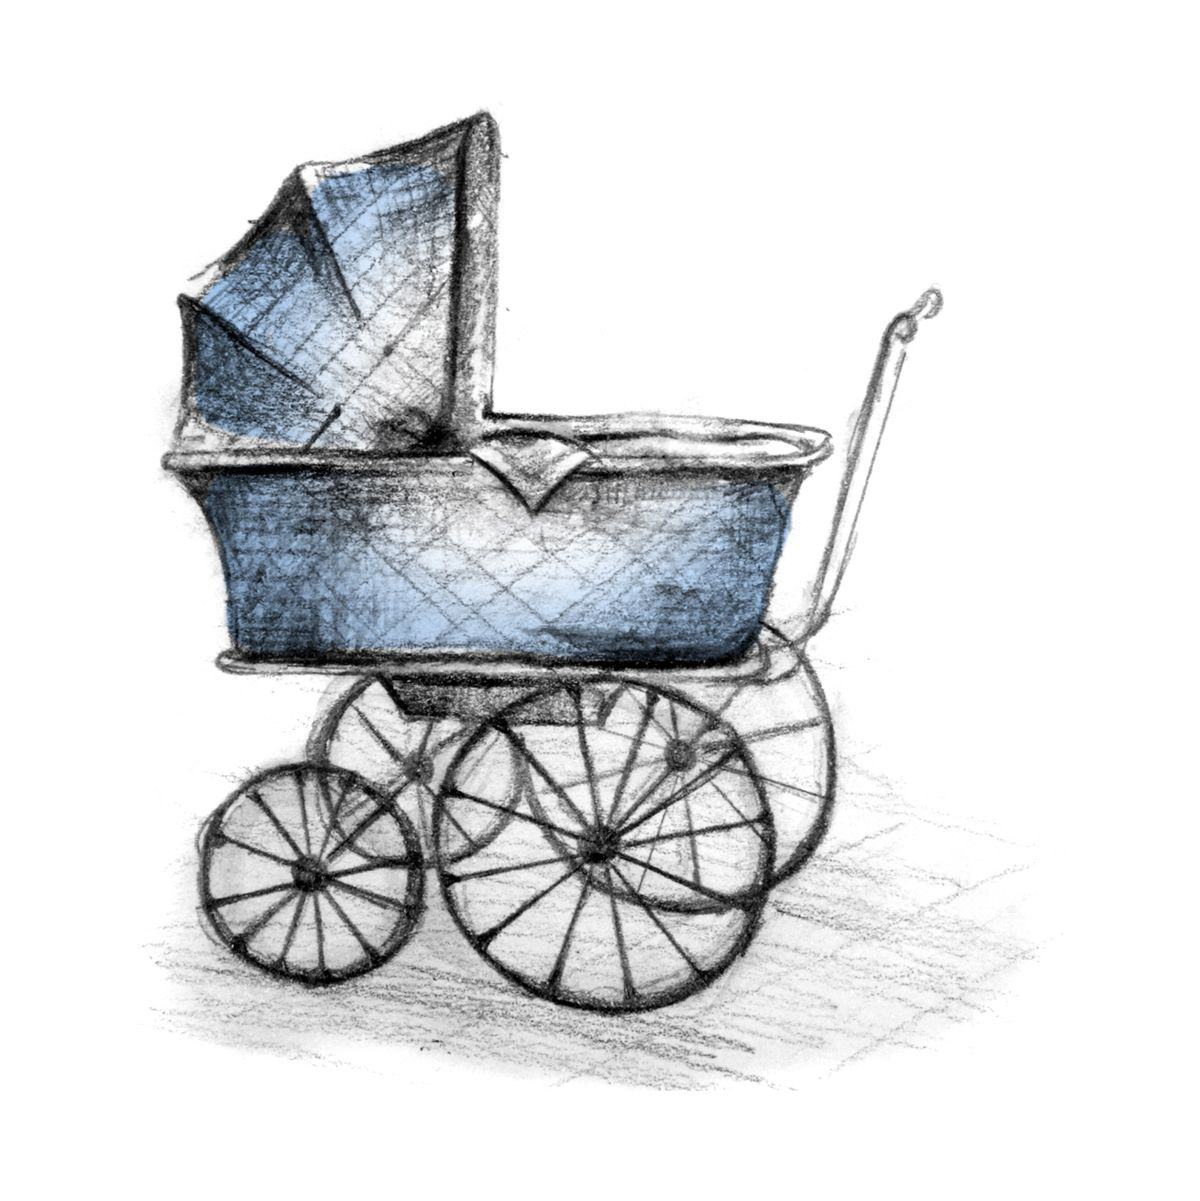 old style baby prams